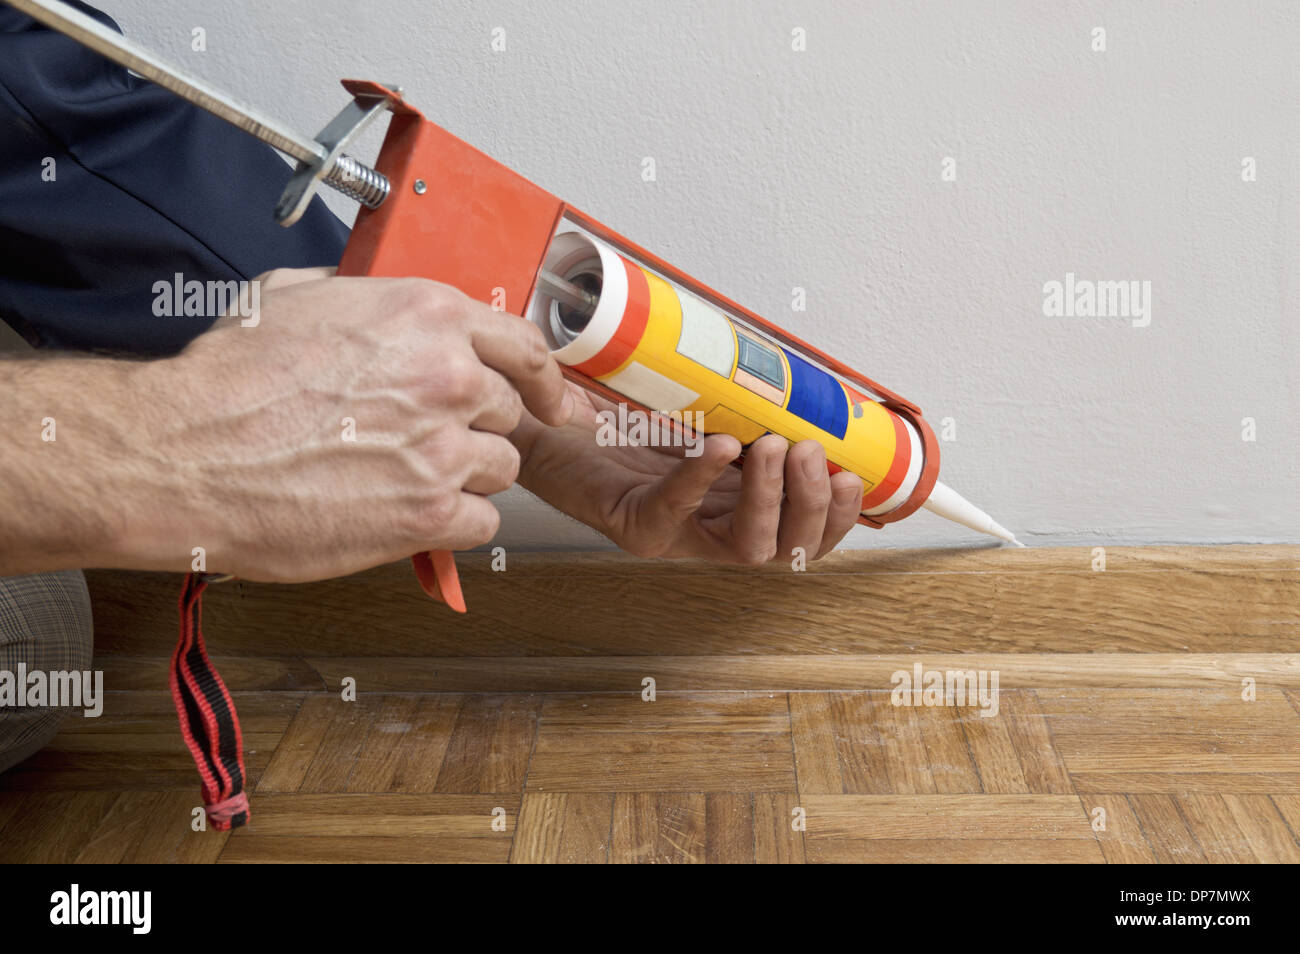 Caulking silicone from cartridge on wooden batten. Stock Photo